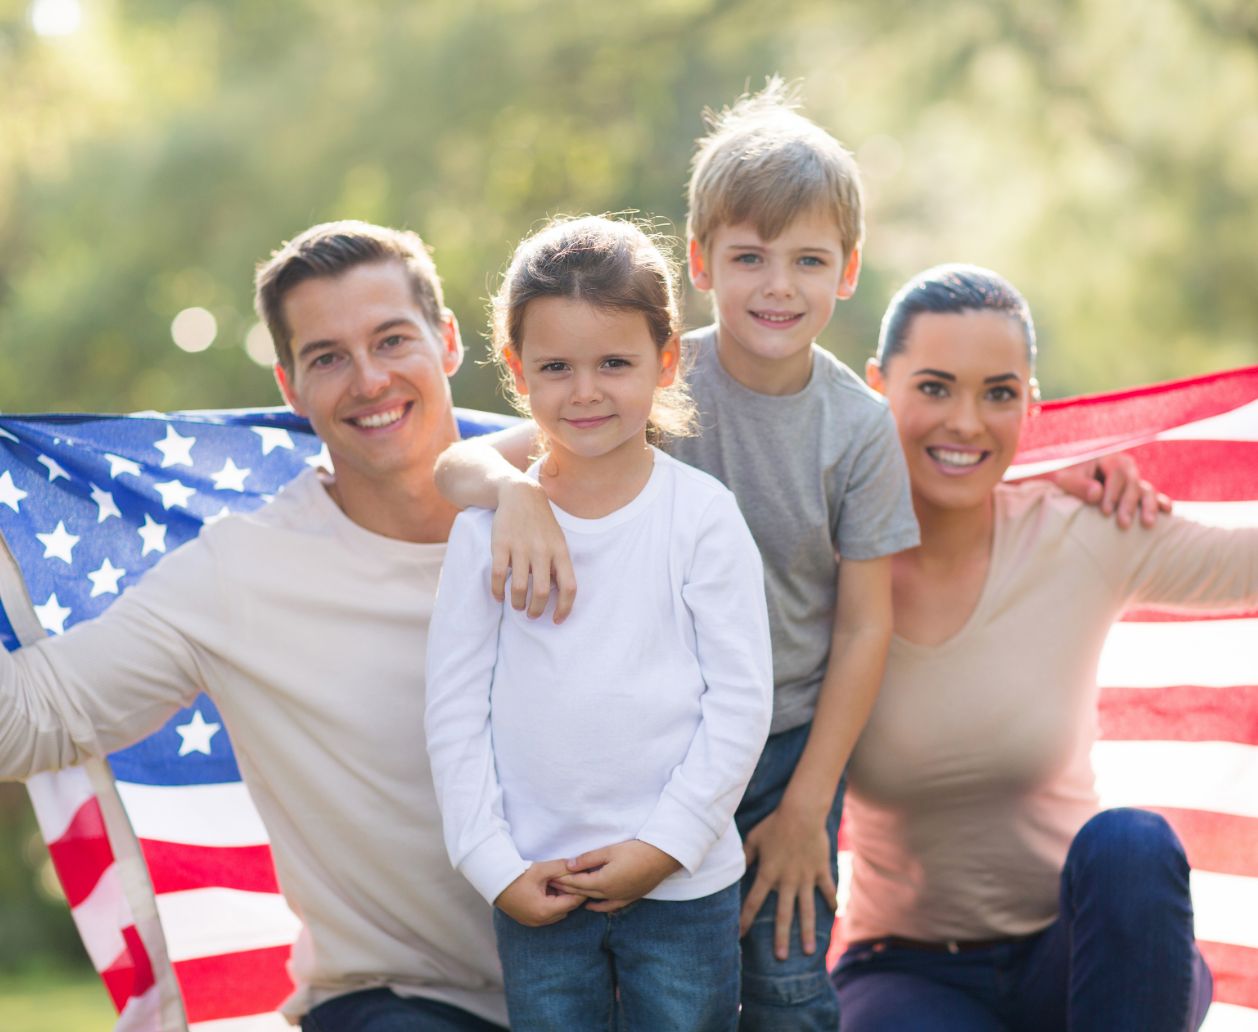 A family outdoors smiling with two adults and two children, holding an American flag behind them, conveying a sense of patriotic pride and togetherness.